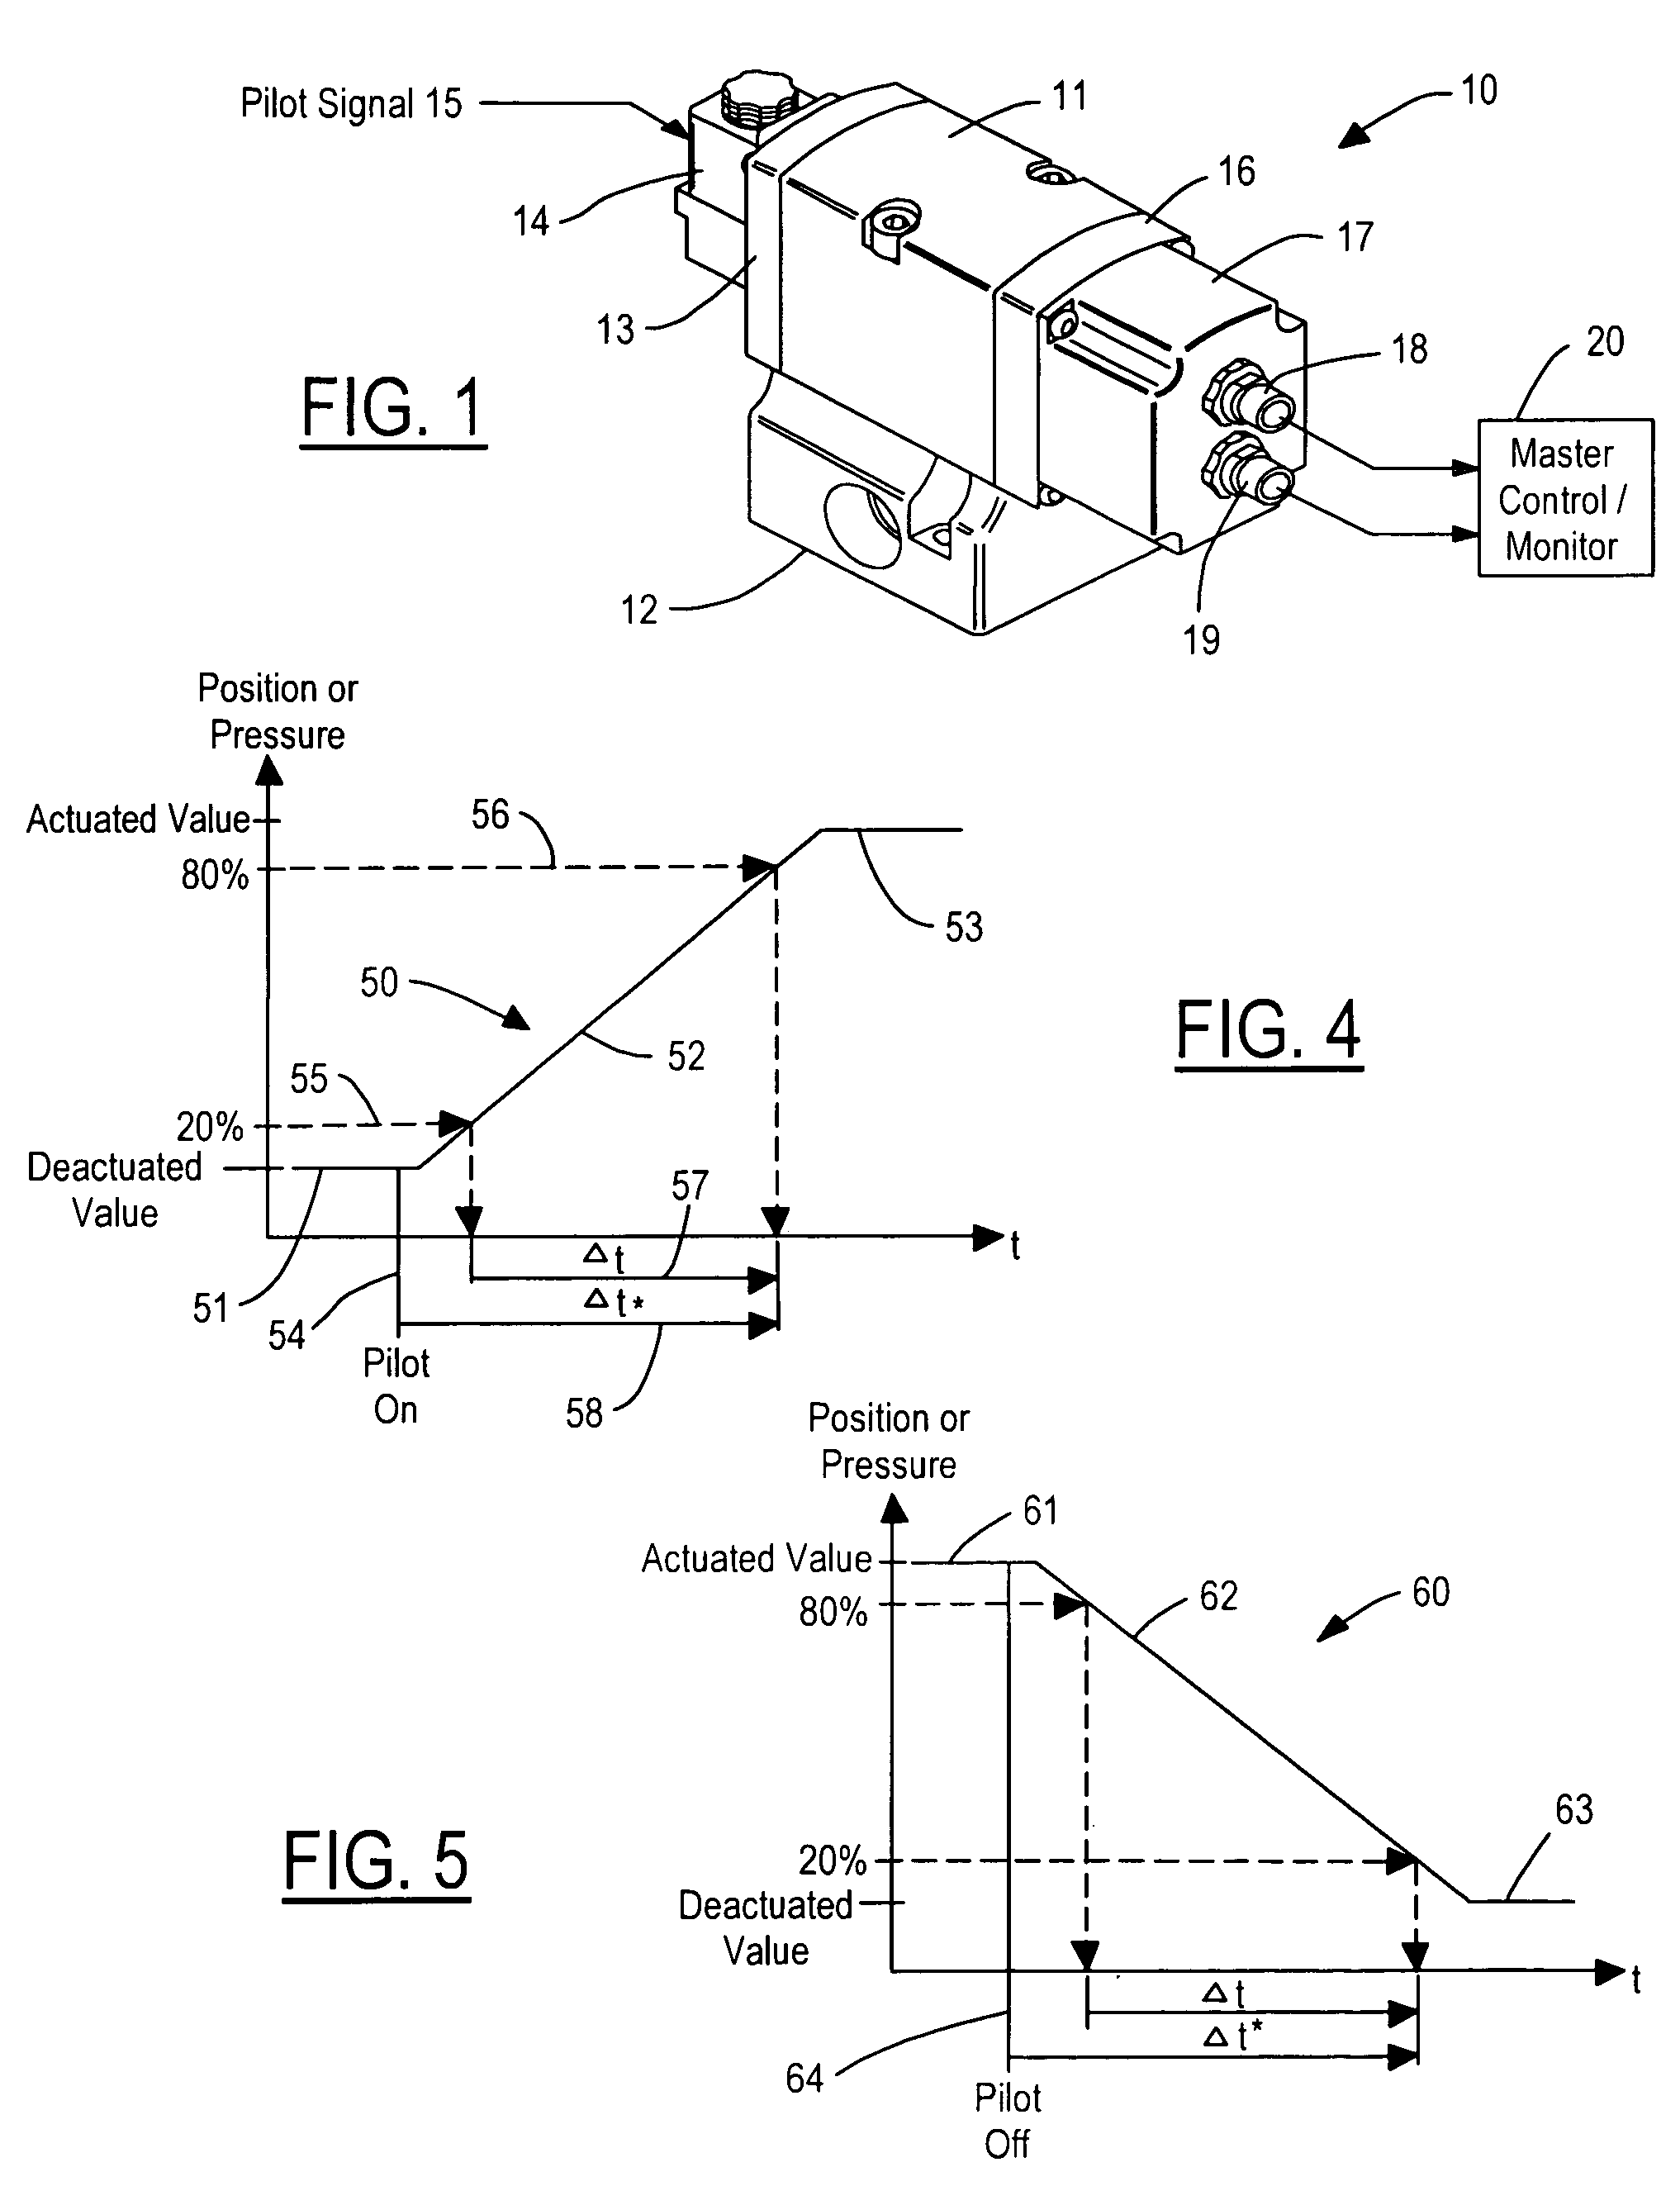 Control Valve System with Cycle Monitoring, Diagnostics and Degradation Prediction